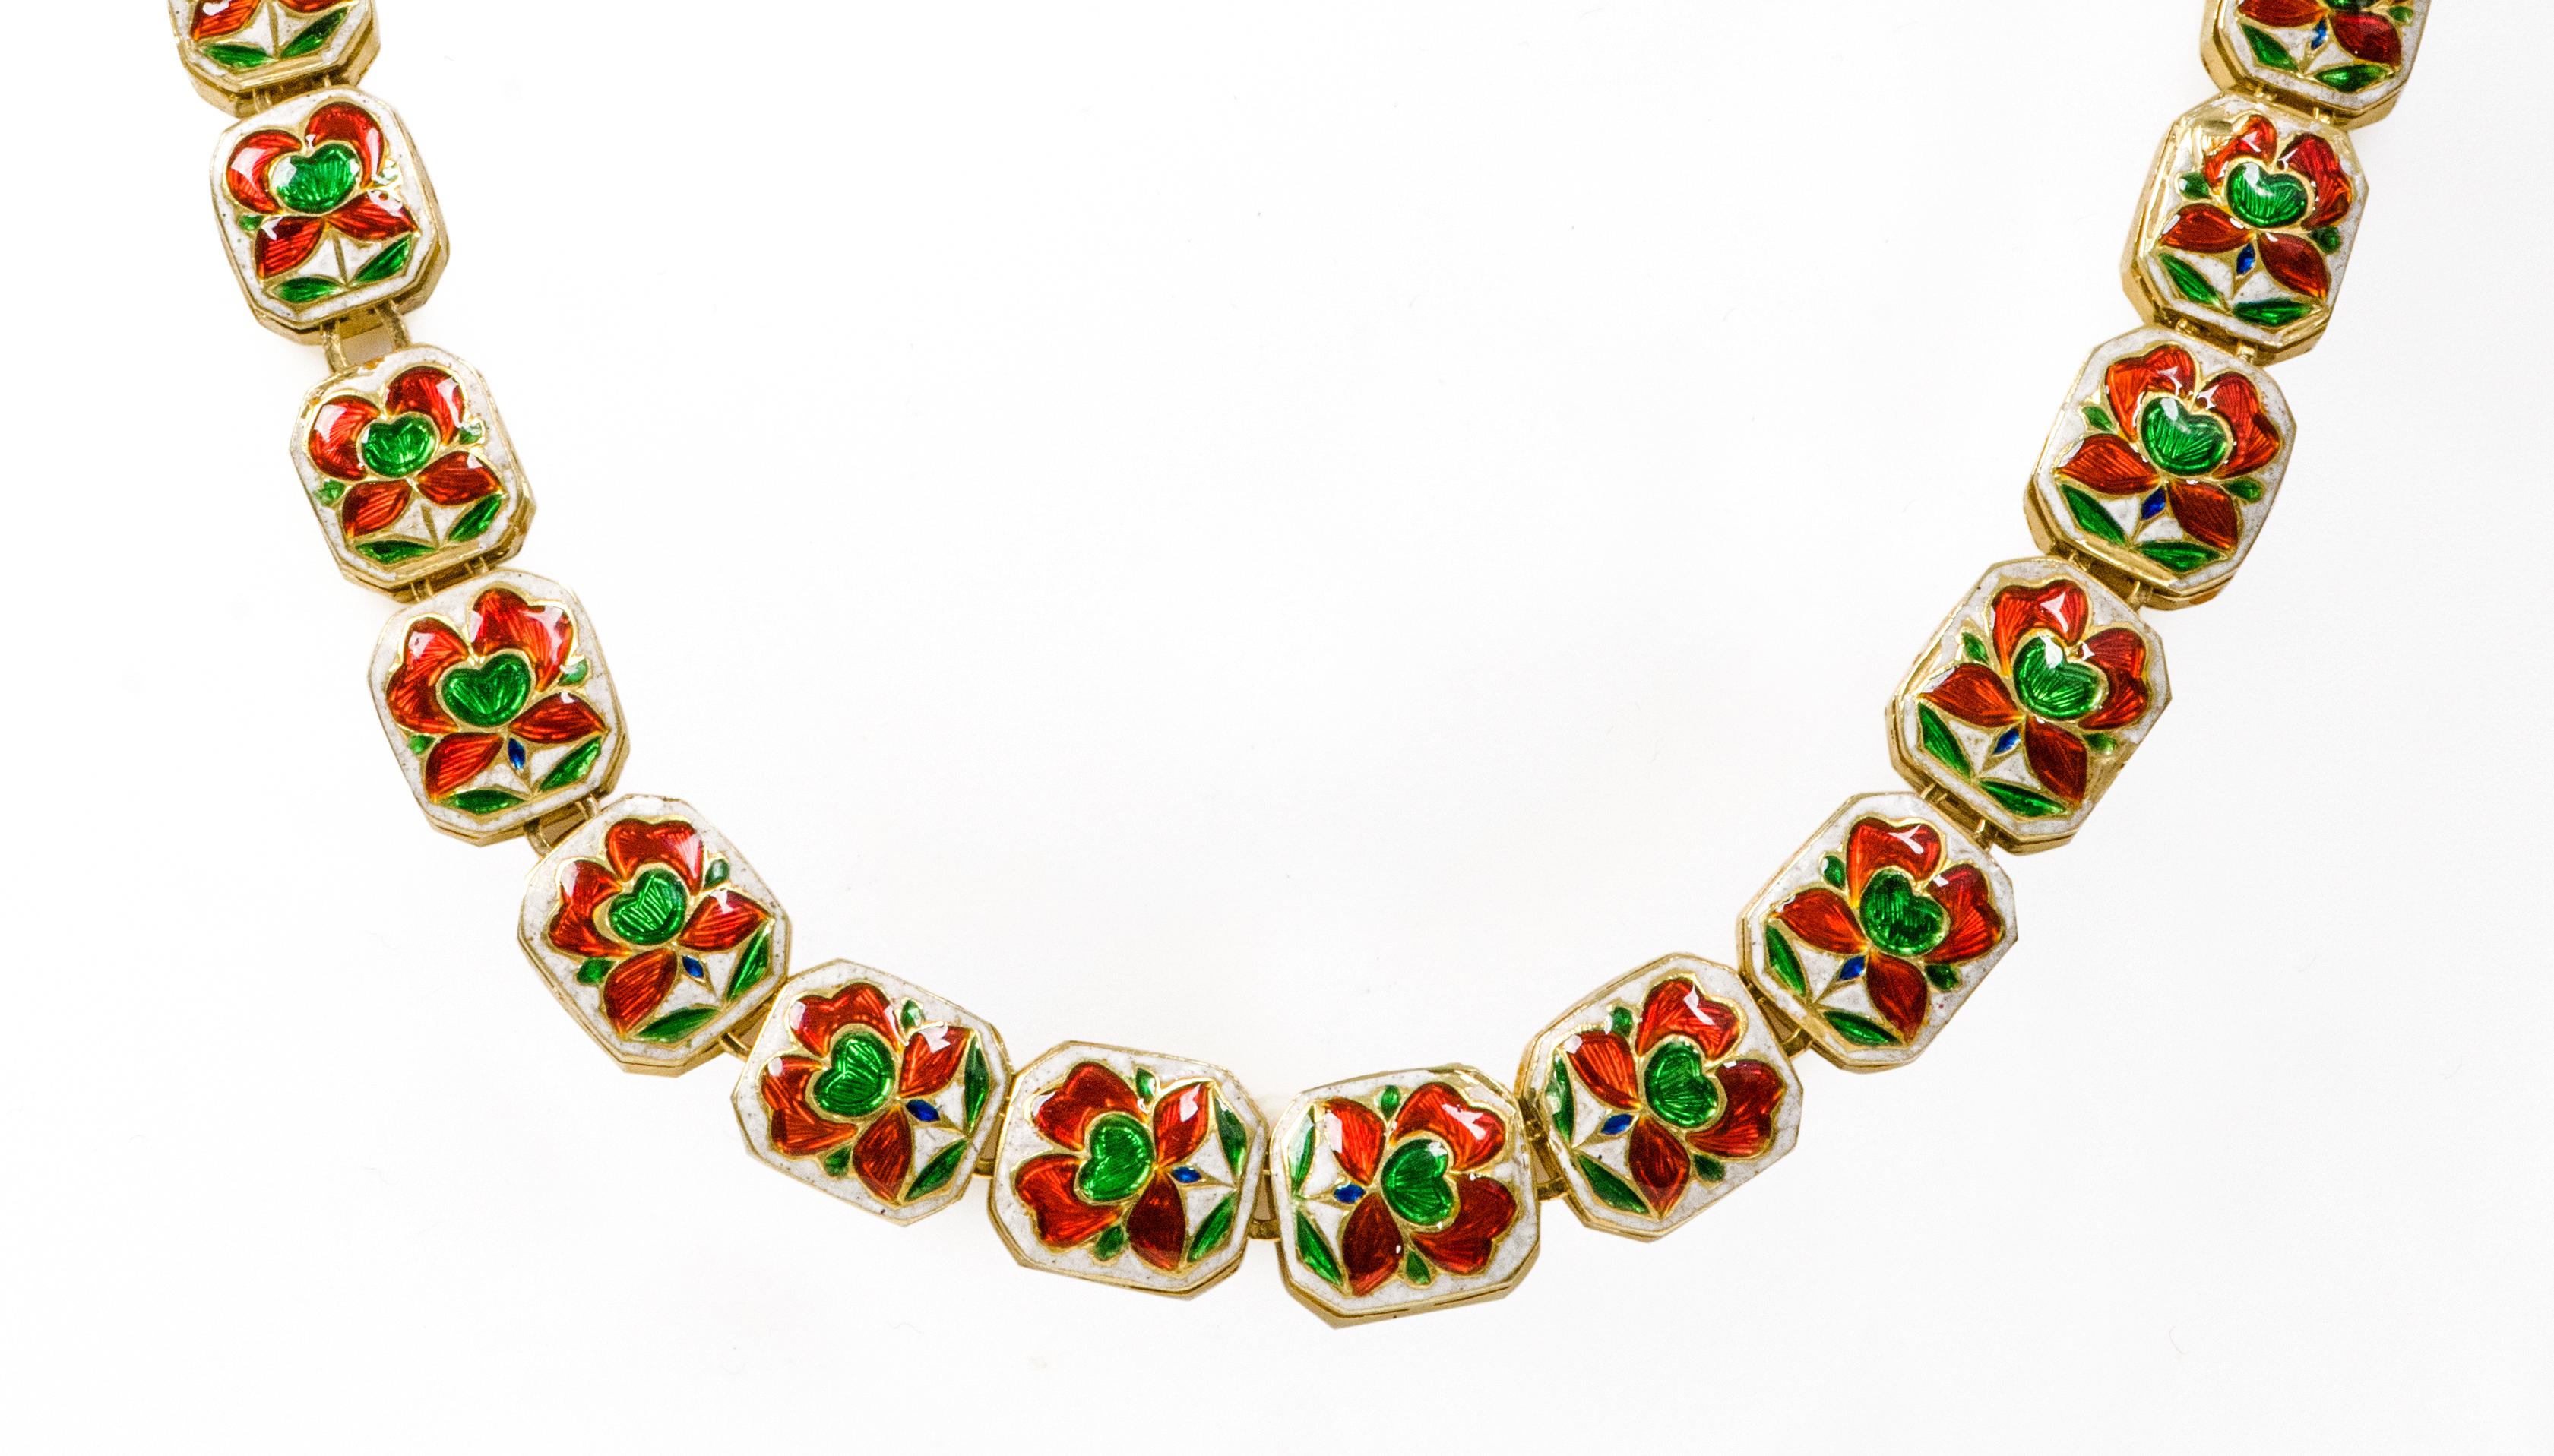 Women's 18 Karat Gold 14.13 Carats Diamond Necklace Handcrafted with Multi-Color Enamel For Sale